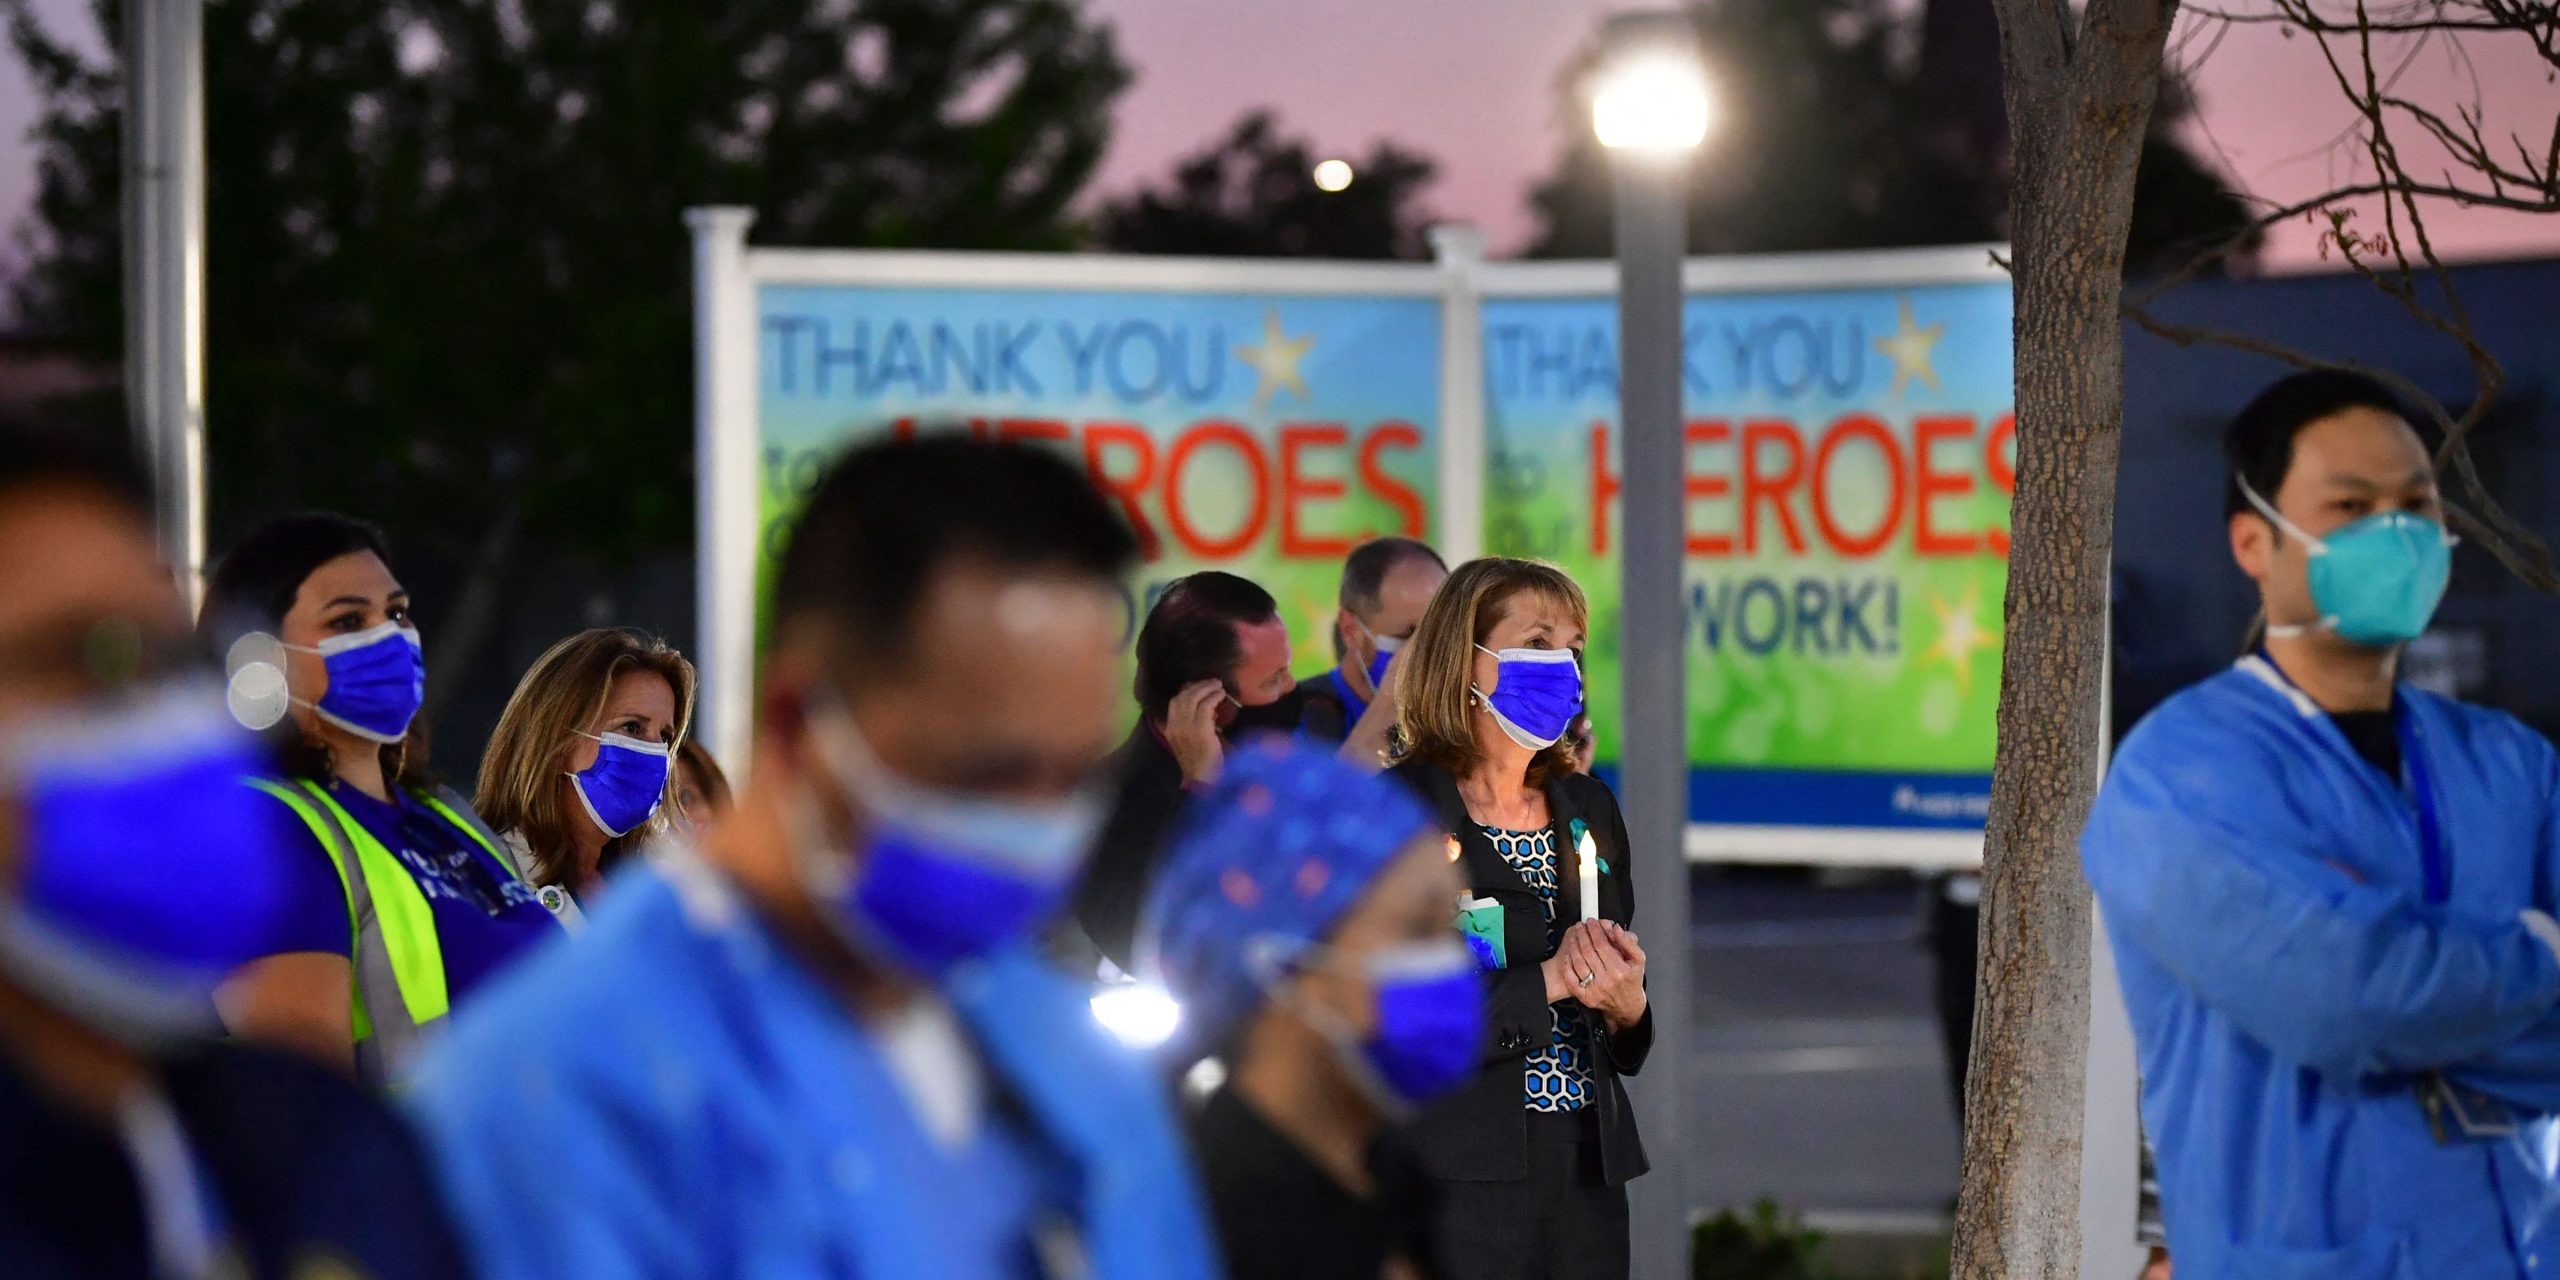 Health care workers at a candlelight vigil.